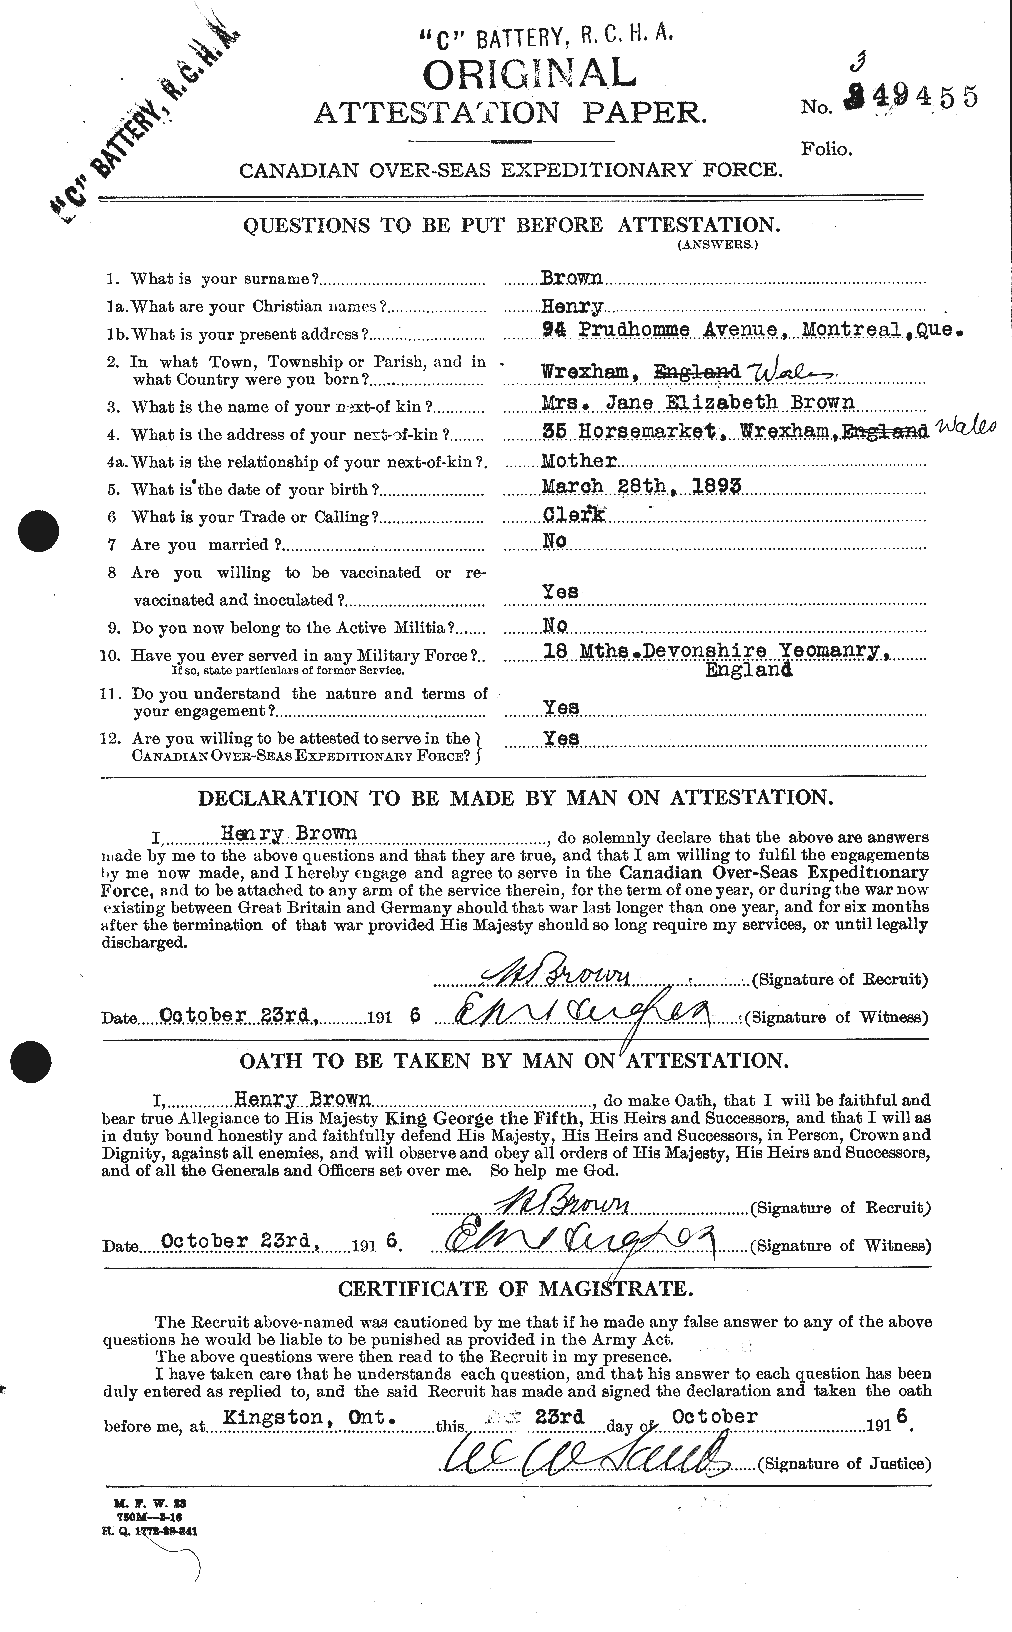 Personnel Records of the First World War - CEF 265513a